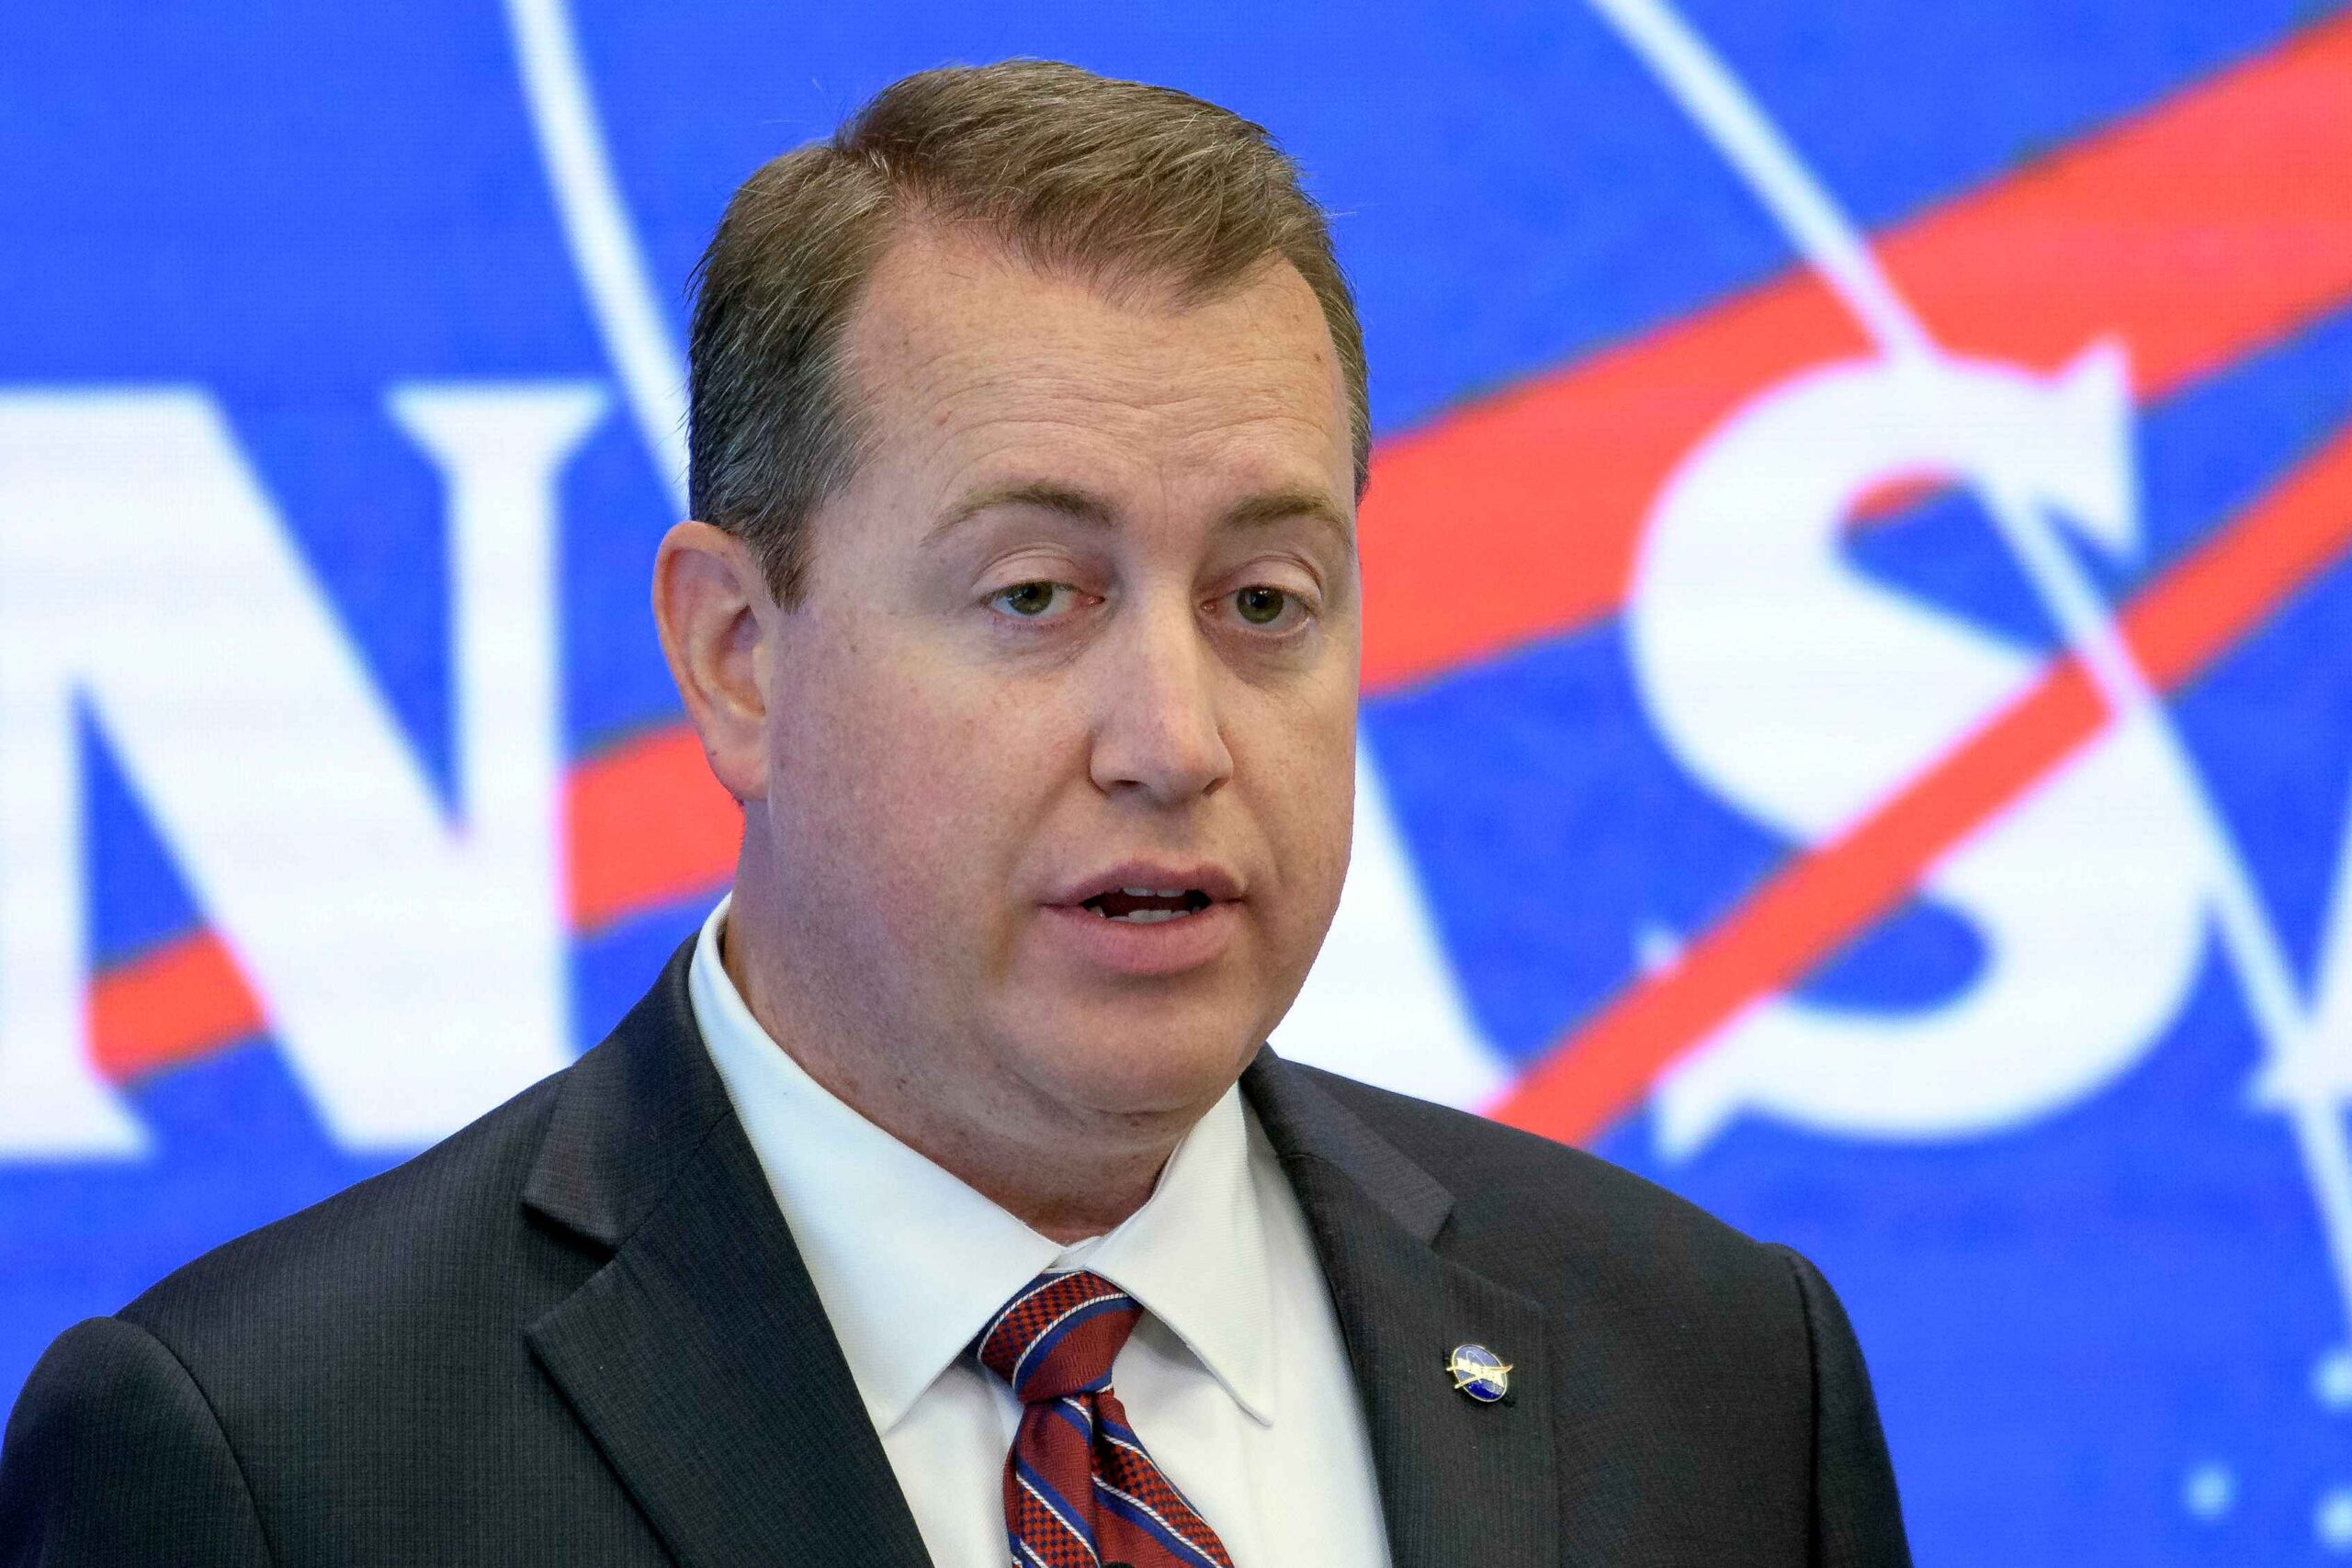 Arizona Republican Party Chairman Jeff DeWit resigned after Senate candidate Kari Lake accused him of attempting to bribe her into ending her campaign. (Bill Ingalls/NASA via AP, File)